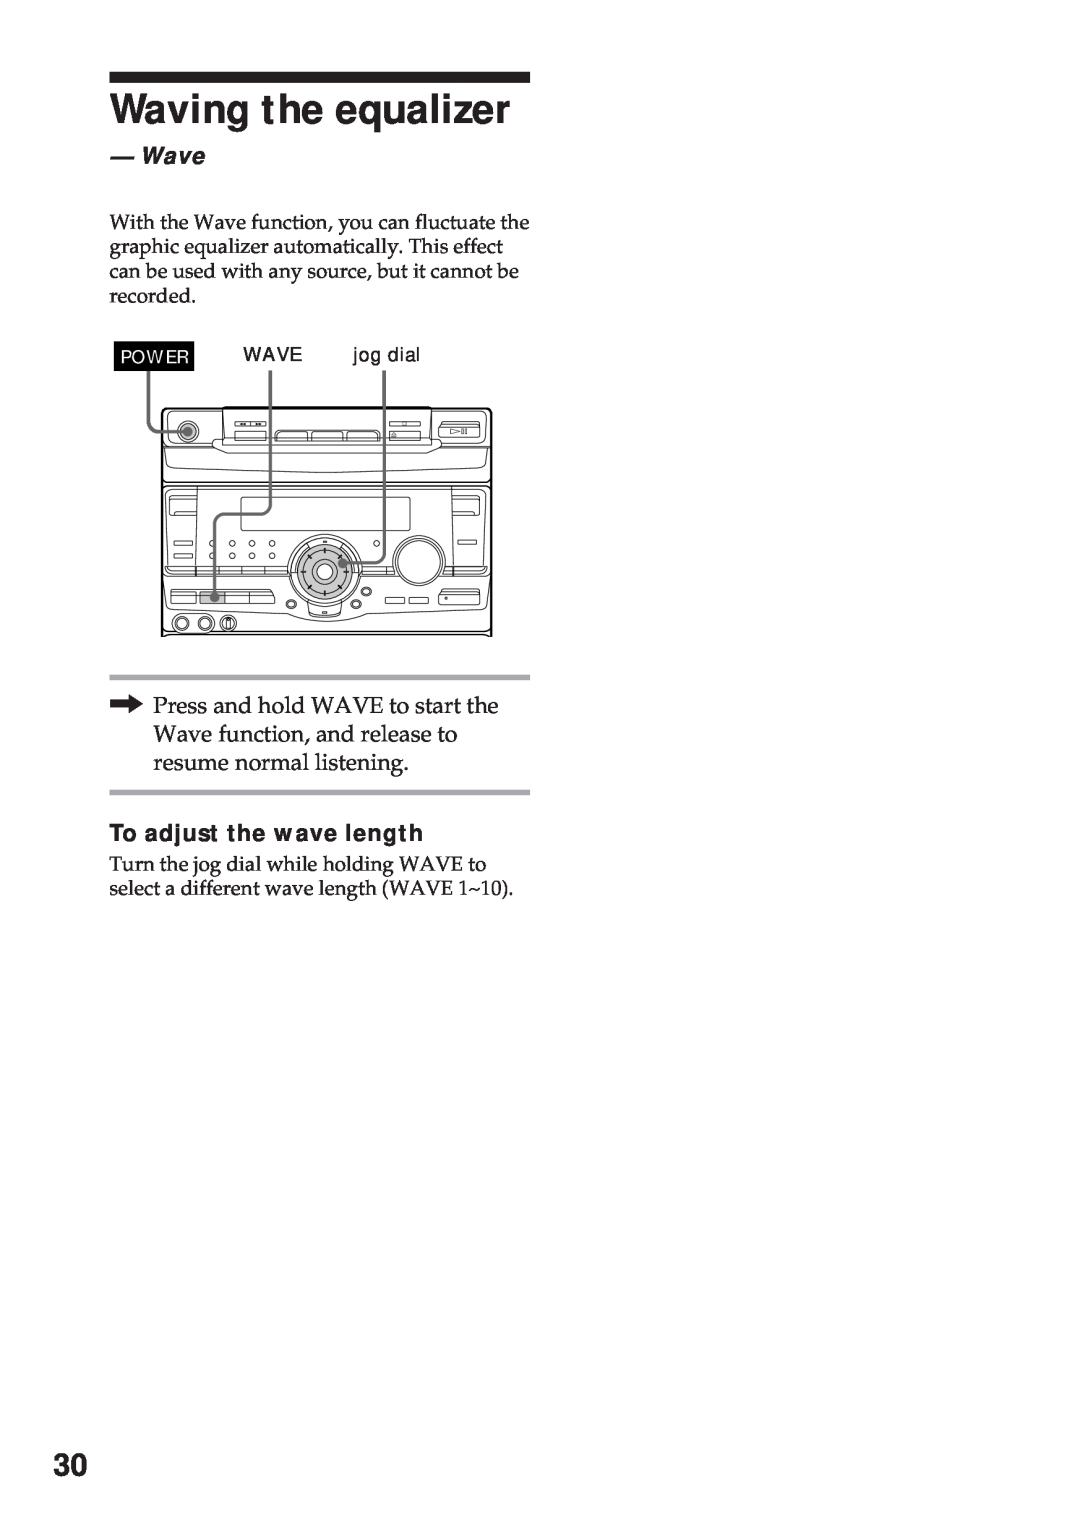 Sony MHC-RX100AV operating instructions Waving the equalizer, Wave, To adjust the wave length 